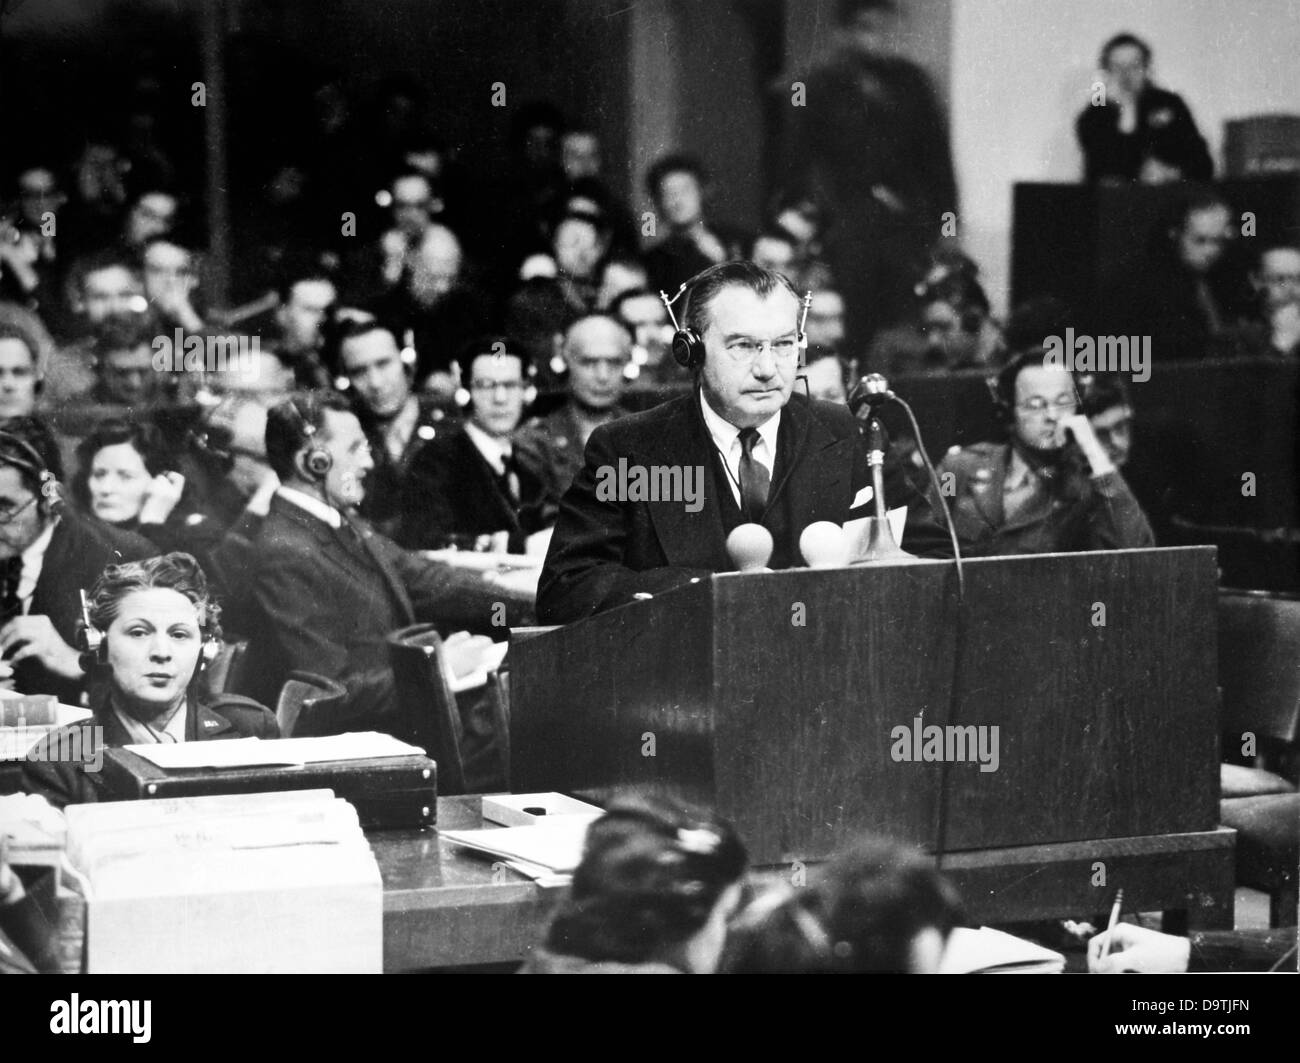 Robert H. Jackson (USA), chief United States prosecutor at the Nuremberg Trials in the context of the International Military Tribunal against the major war criminals of World War II in Nuremberg, Germany, in 1946. Photo: Yevgeny Khaldei Stock Photo